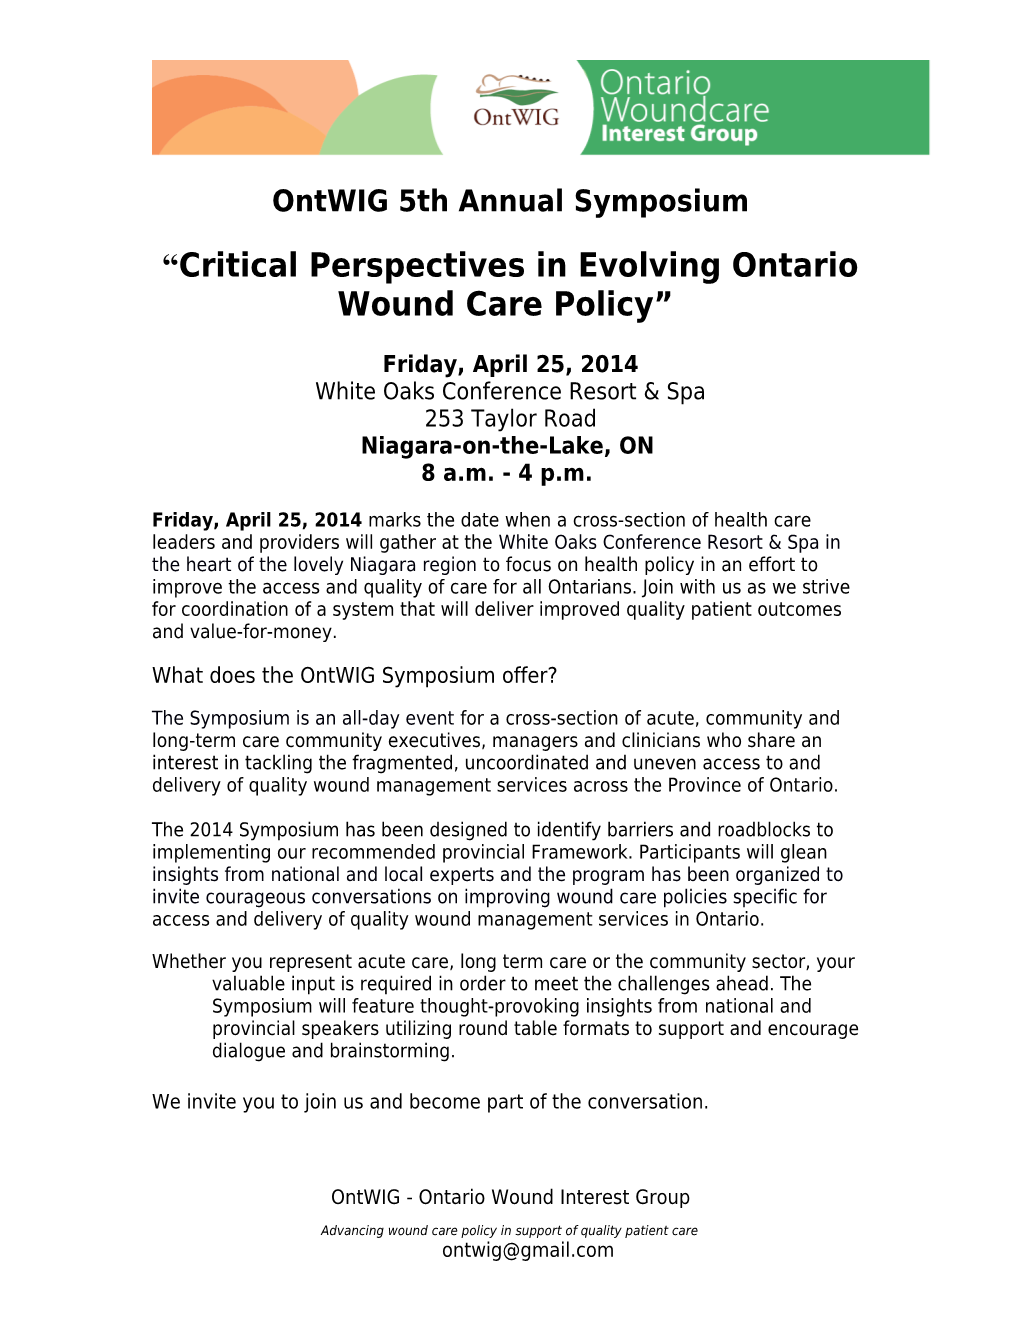 Critical Perspectives in Evolving Ontario Wound Care Policy